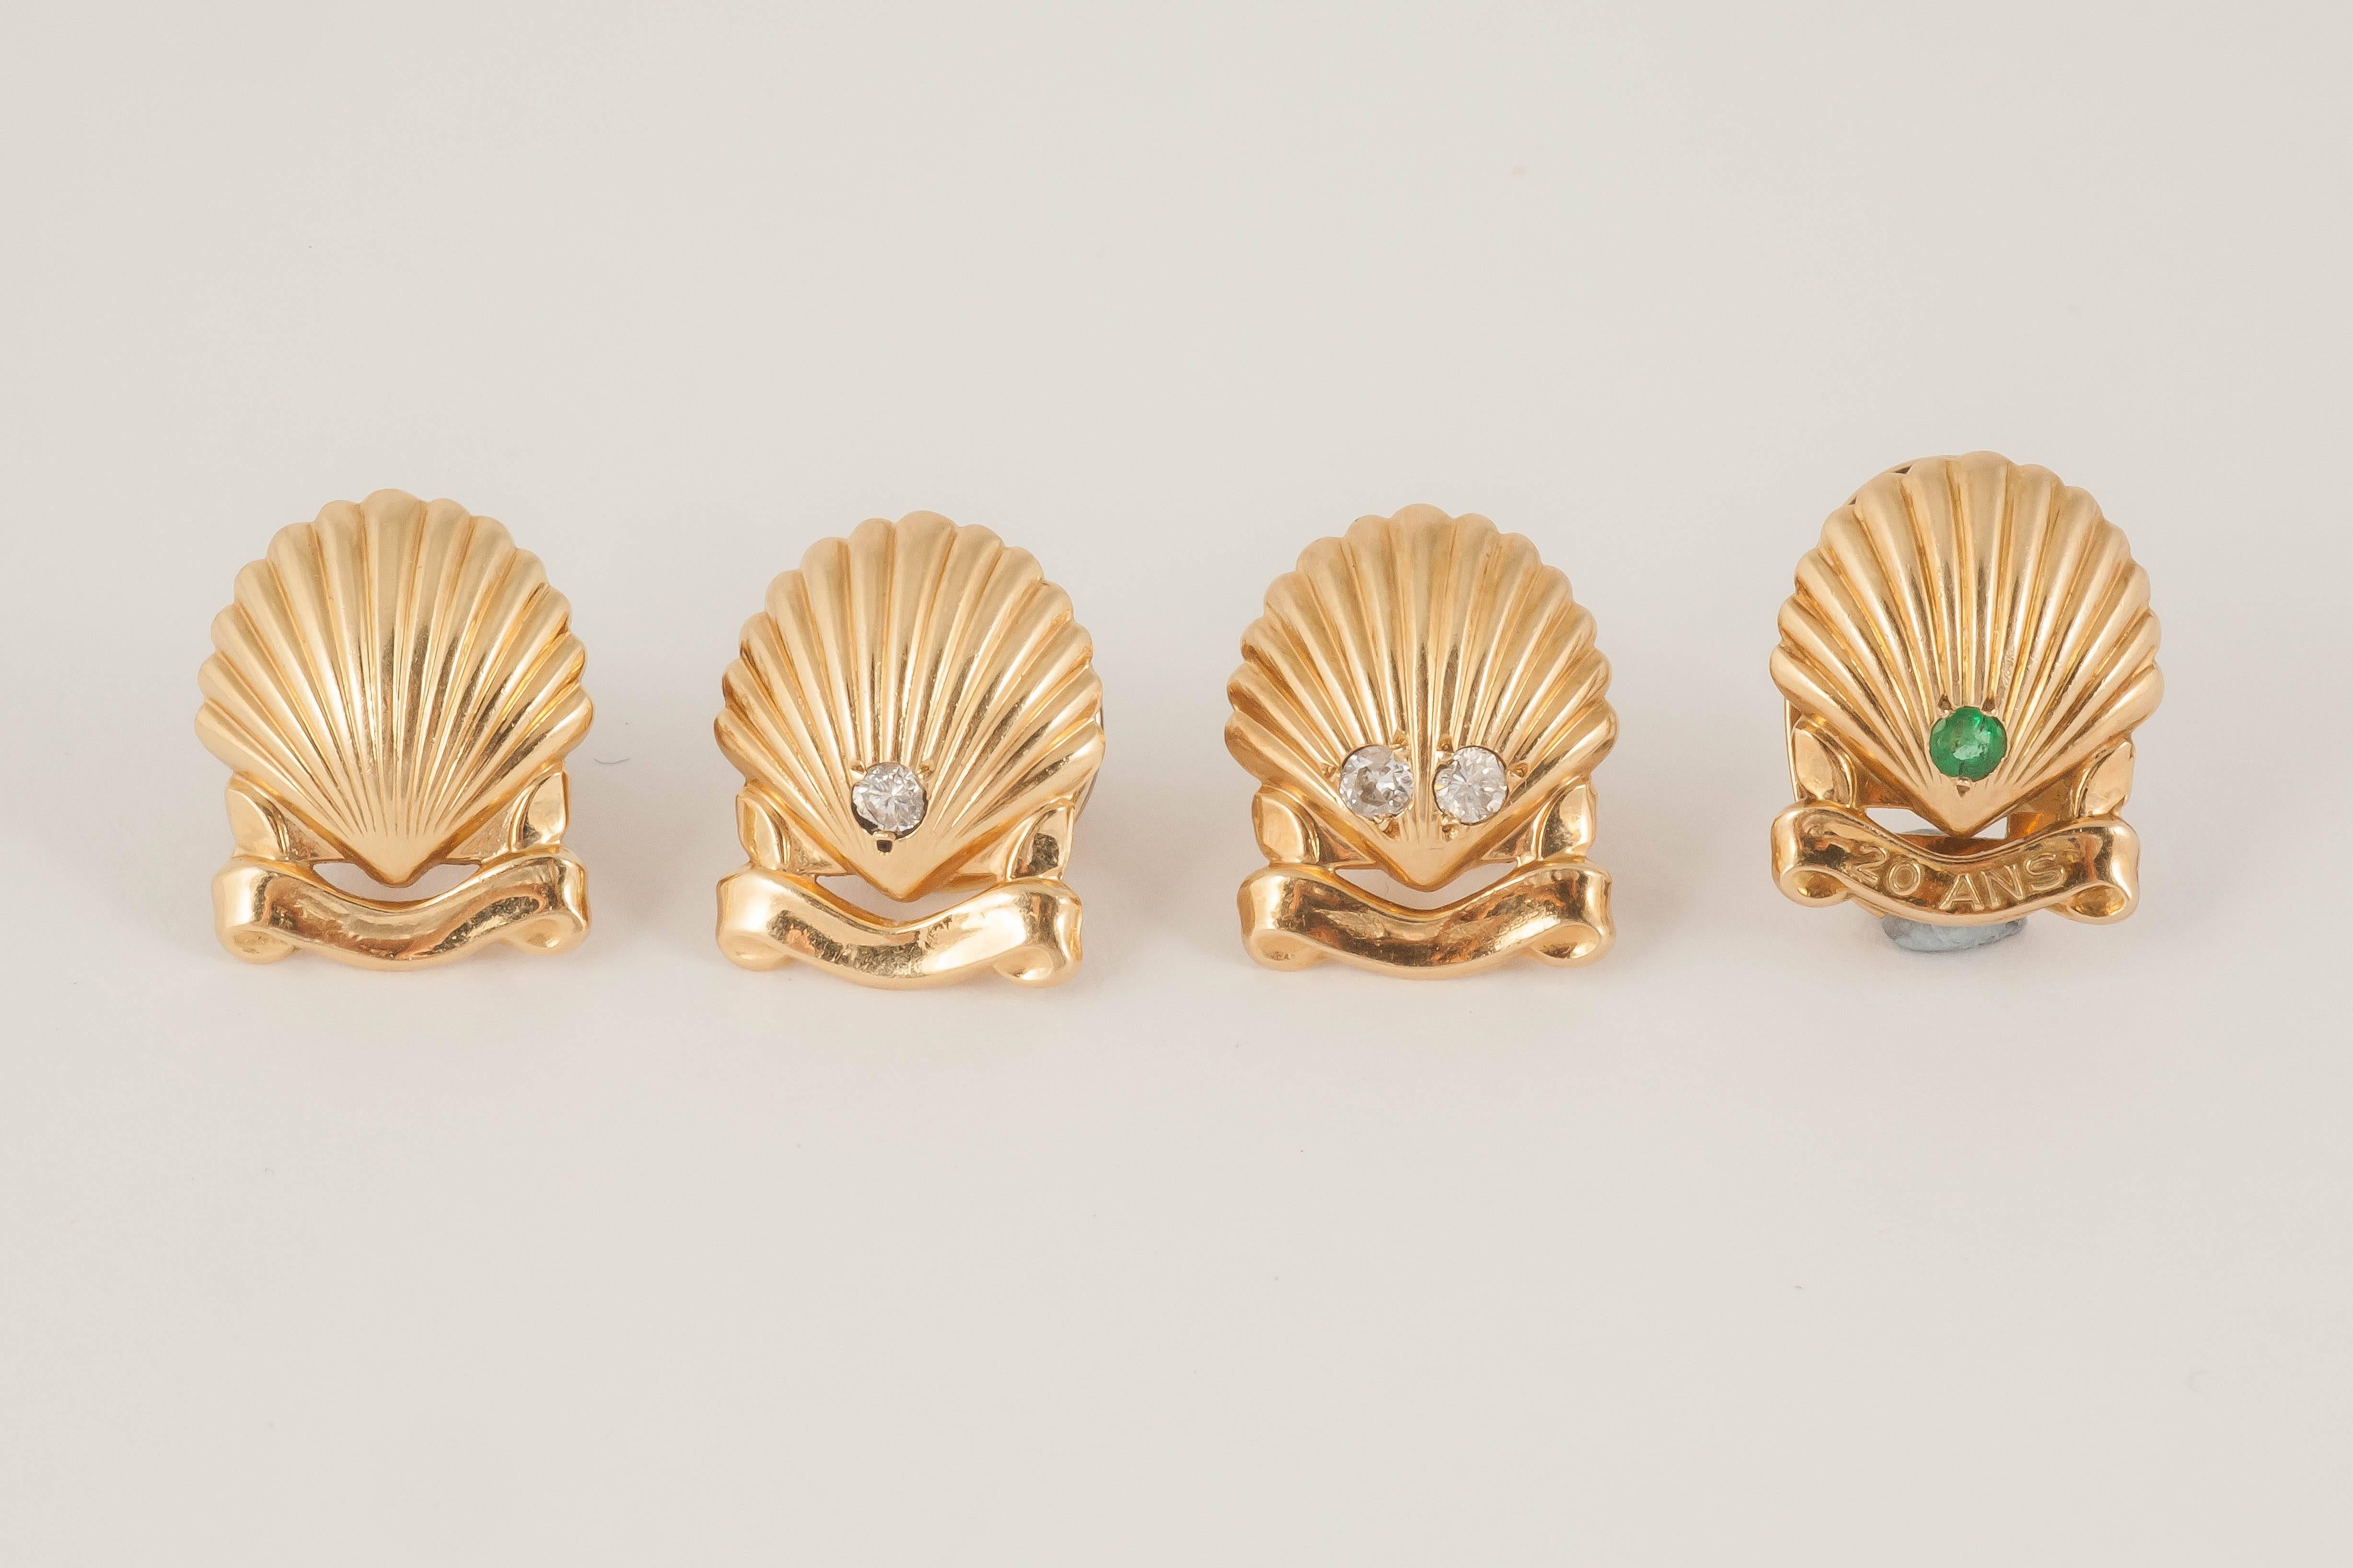 An interesting set of four 18ct gold buttons of shells with cartouche below,one plain,one with one diamond,one with two diamonds,and one with an emerald with 20 ANS engraved below.Signed Cartier Paris with French mark.c,1950